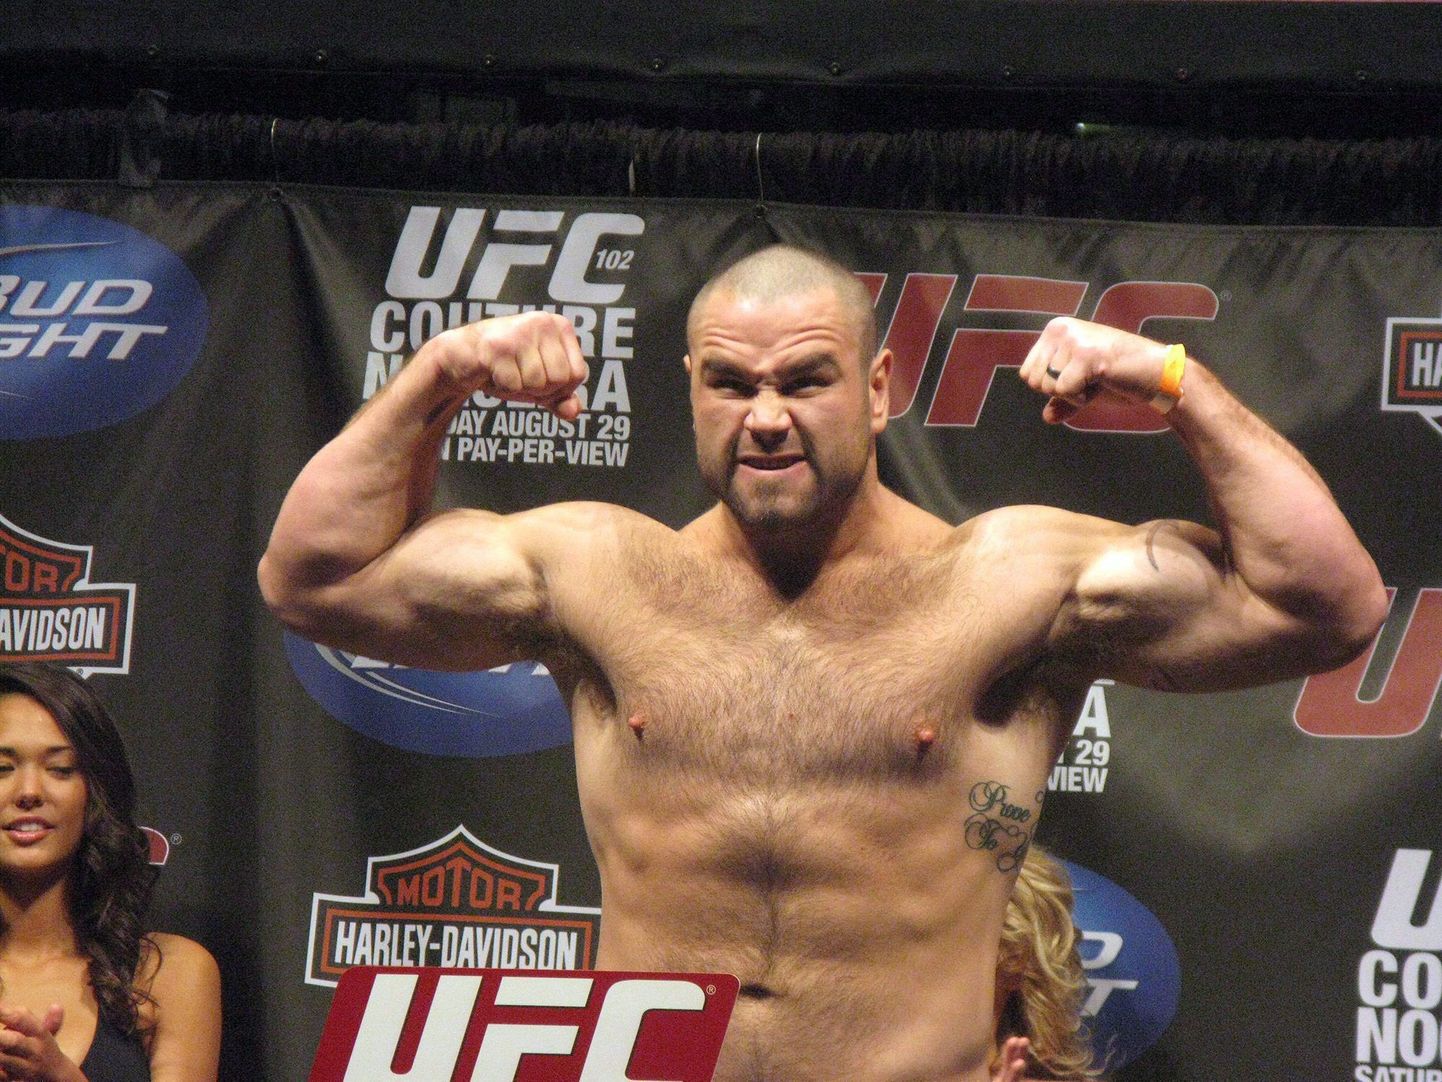 Edmonton heavyweight Tim Hague poses at a weigh-in Portland, Ore. on Friday Aug. 28, 2009. A boxer who had been in critical condition since a fight in Edmonton on Friday night has died, his sister says.Jackie Neil says in a statement on behalf of her family that Tim Hague died on Sunday.THE CANADIAN PRESS/Neil Davidson